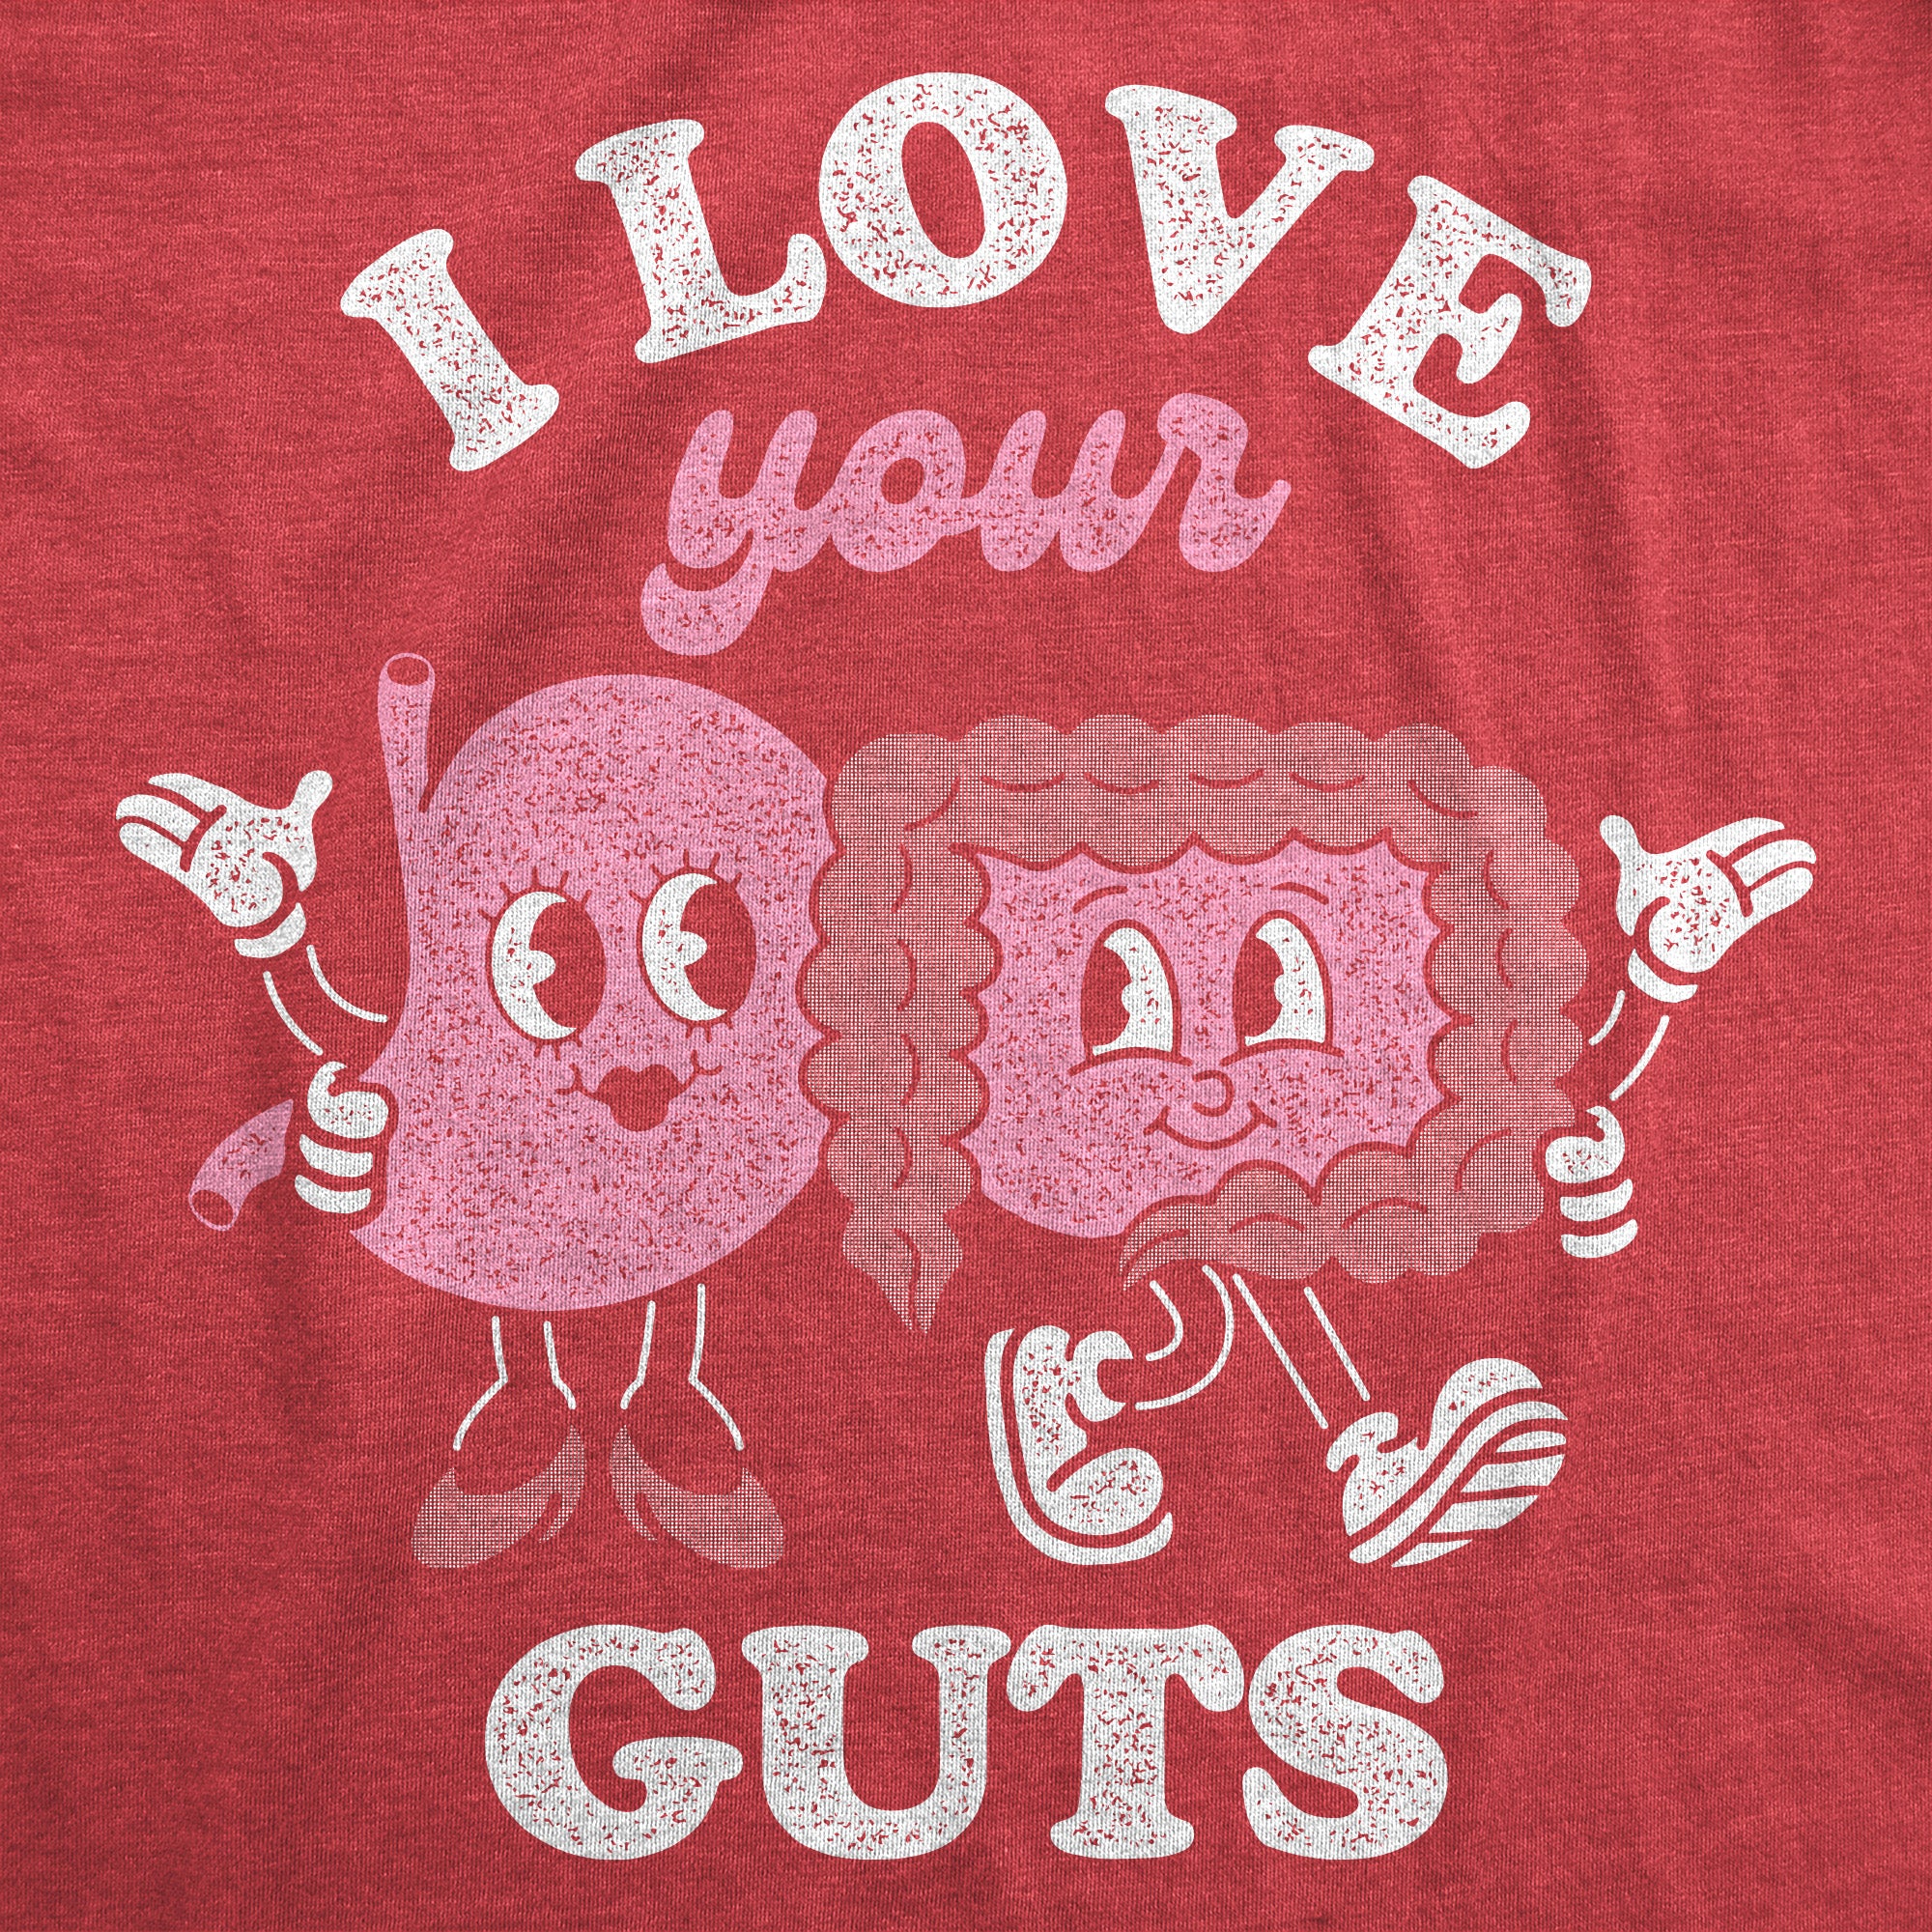 Funny Heather Red - I Love Your Guts I Love Your Guts Womens T Shirt Nerdy Valentine's Day Sarcastic Tee